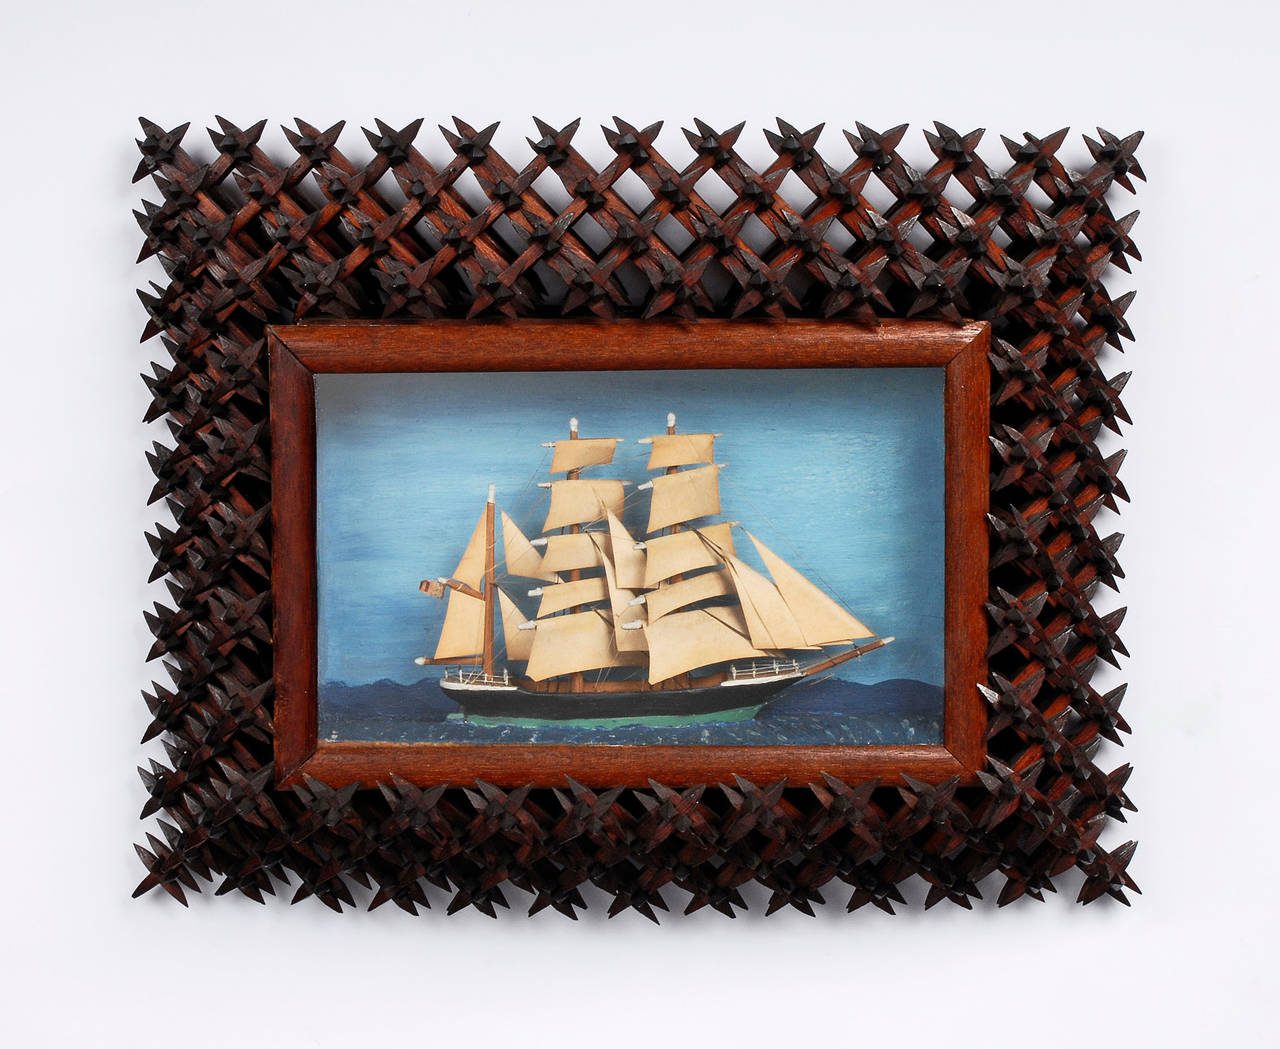 Wonderful tramp art crown-of-thorns sailboat diorama. The sailboat is mounted under glass and the boat is finely carved with three masts and folded paper sails.